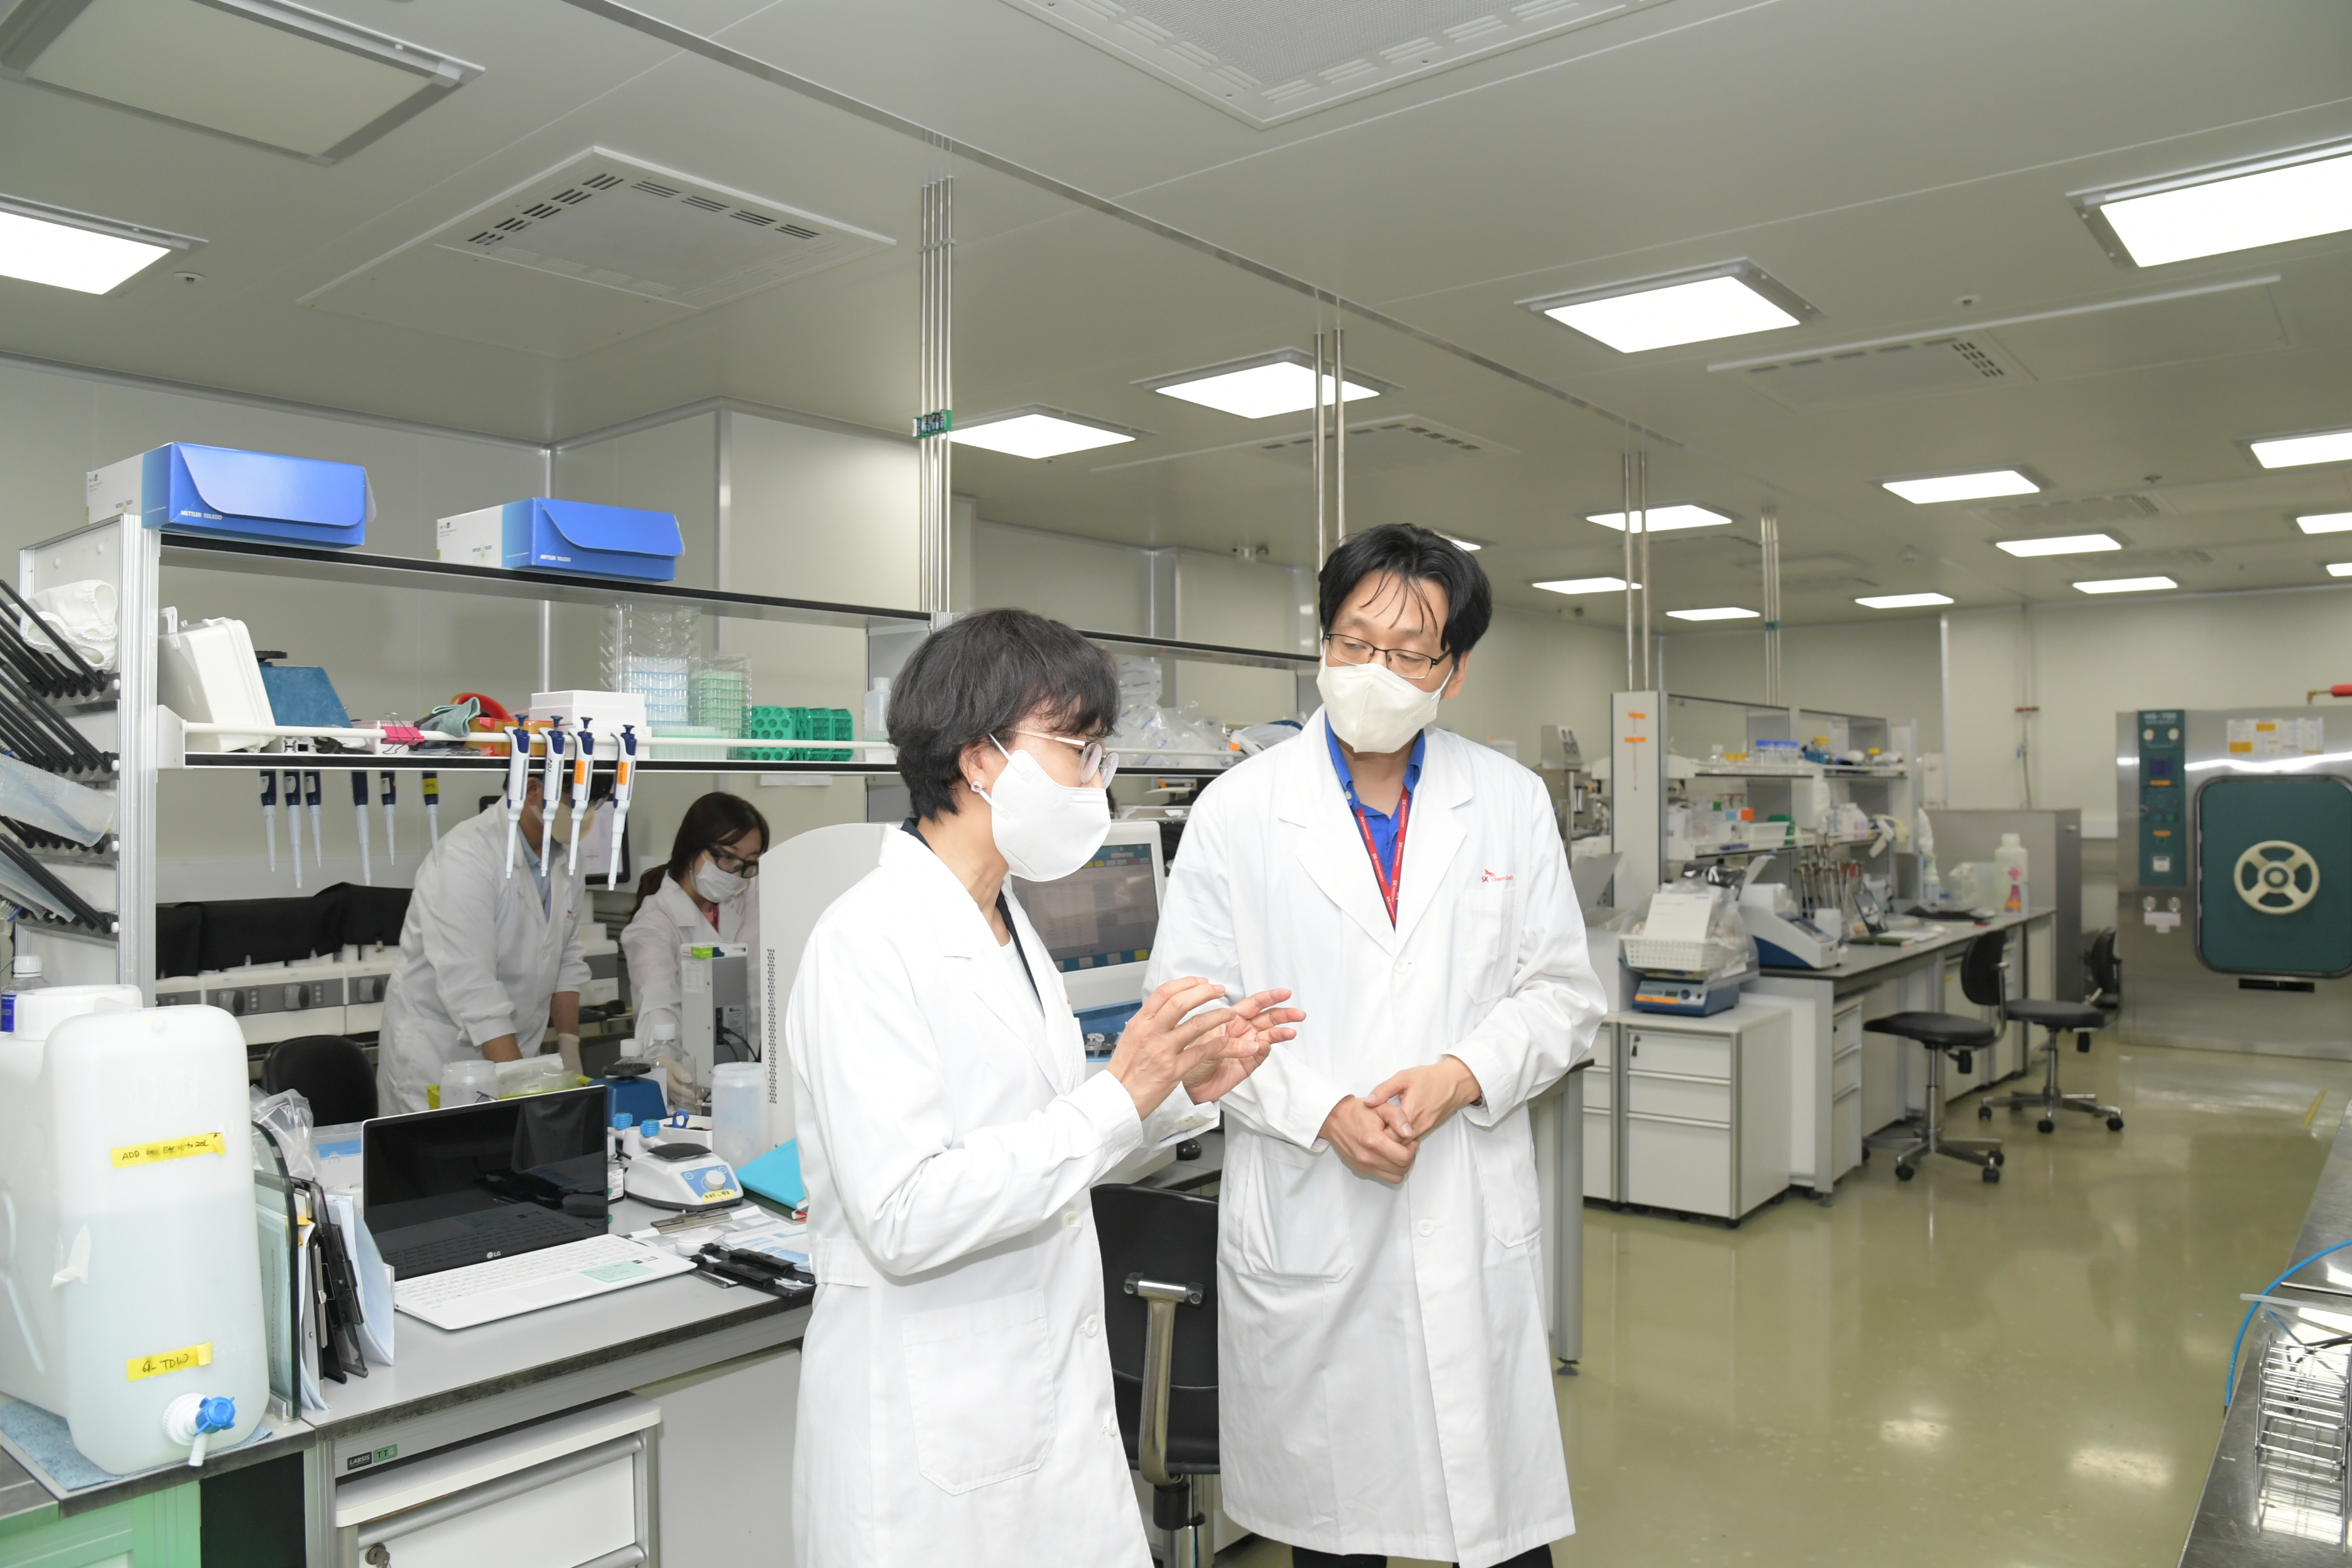 Photo News4 - [June 30, 2022] Minister Visits Medical Product Manufacturing Site